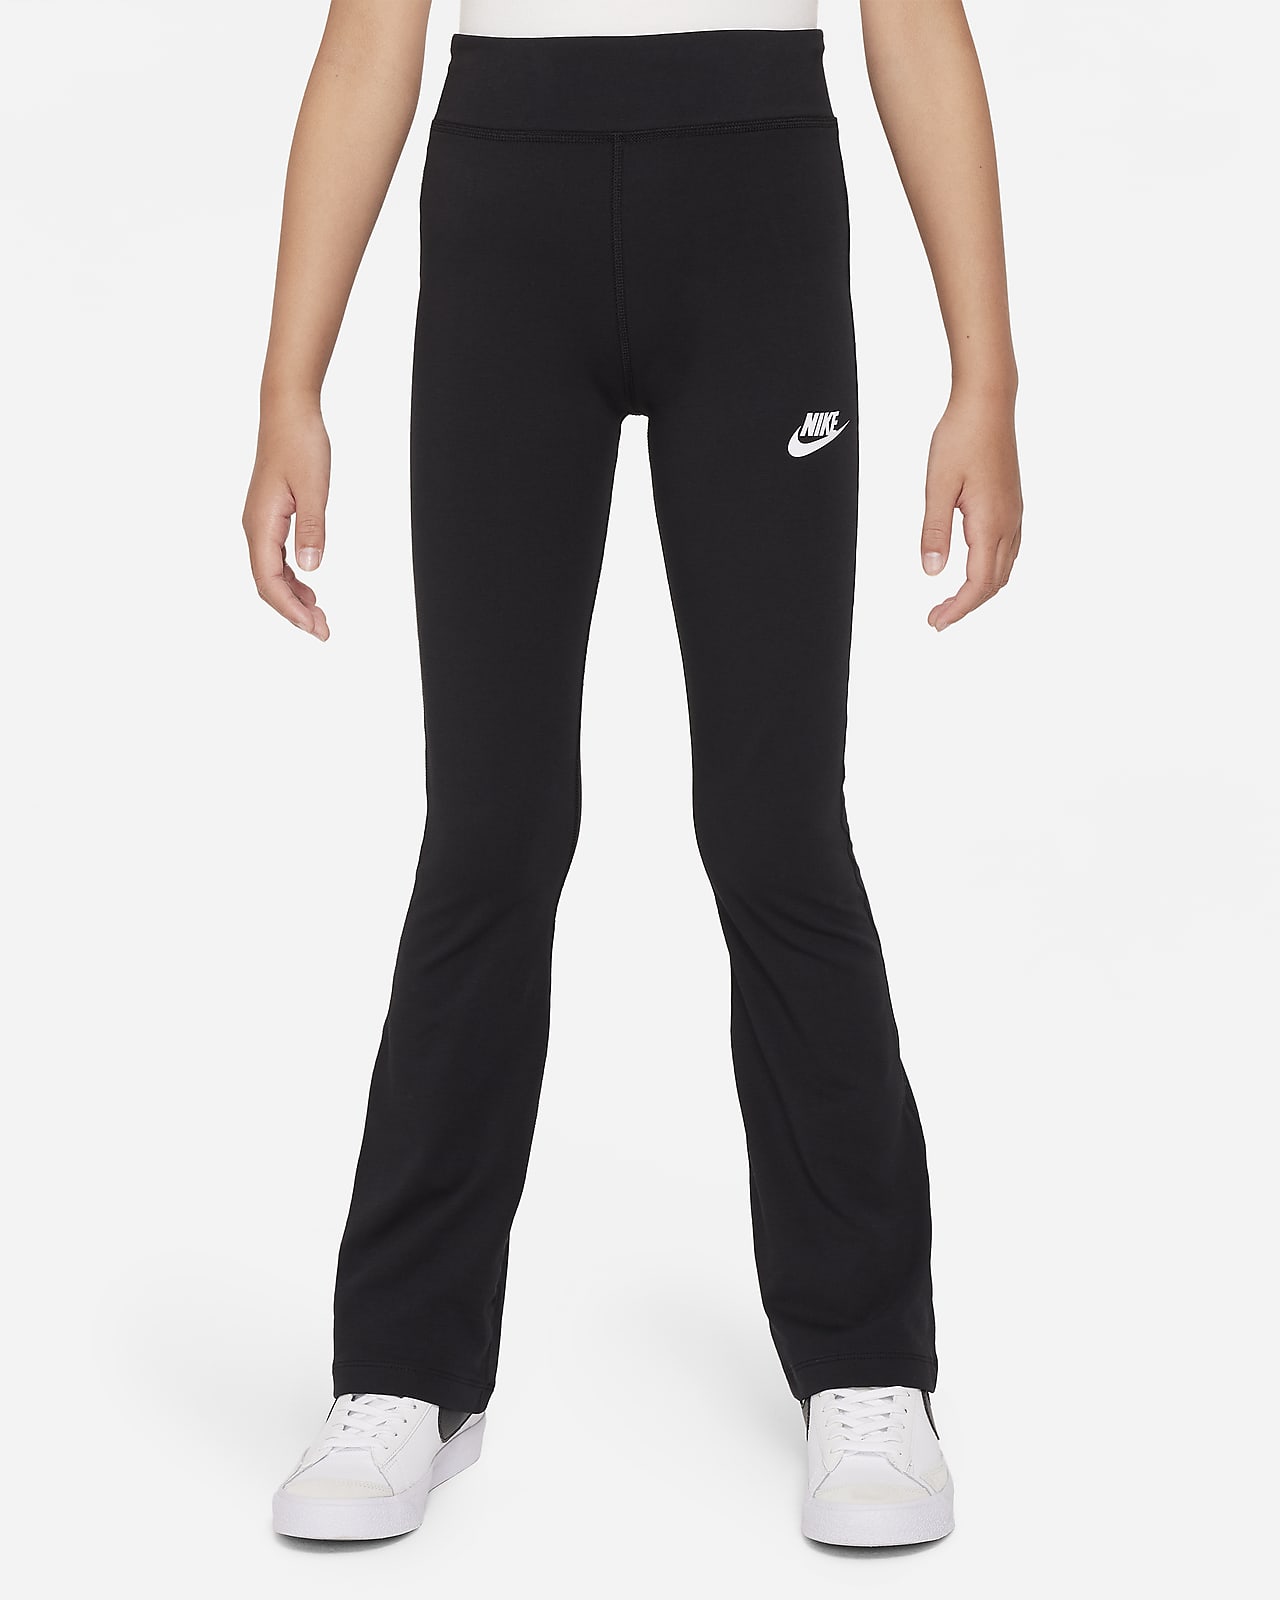 https://static.nike.com/a/images/t_PDP_1280_v1/f_auto,q_auto:eco/52db0fdf-c056-4c74-87fe-1ff8ceca57a9/sportswear-favourites-older-flared-leggings-Wd2hRF.png